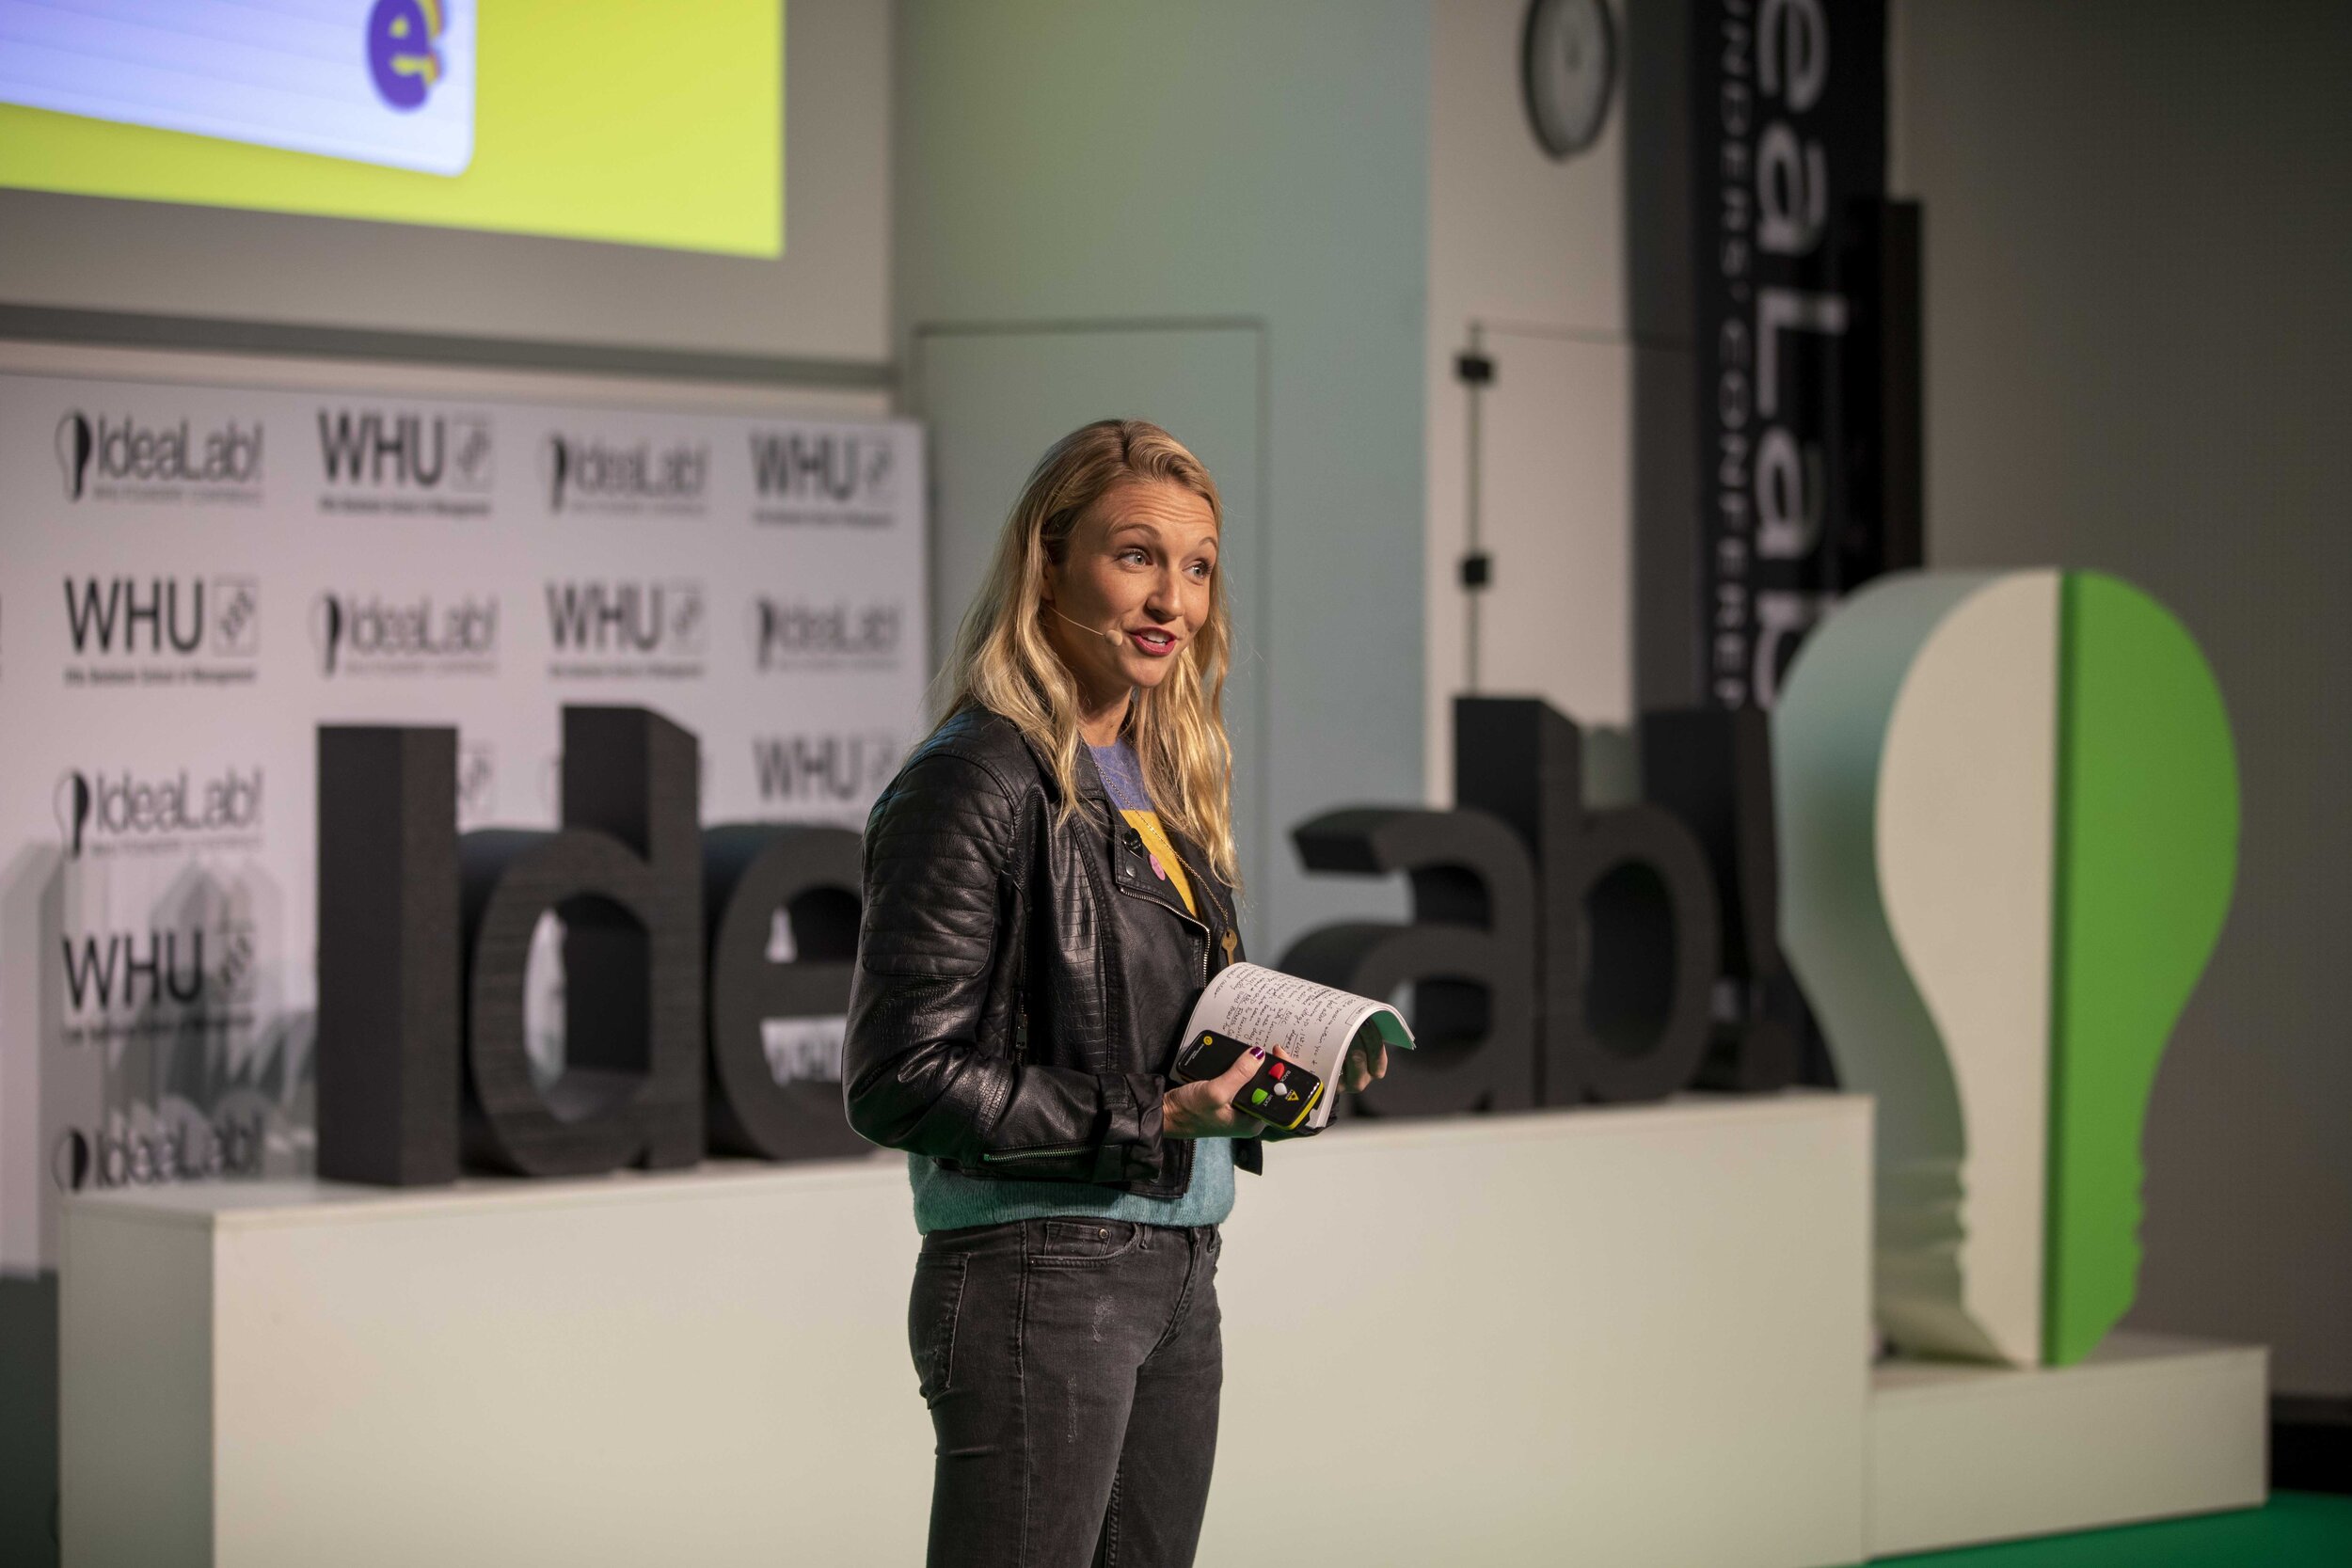 IdeaLab! Founders' Conference, Germany 2019